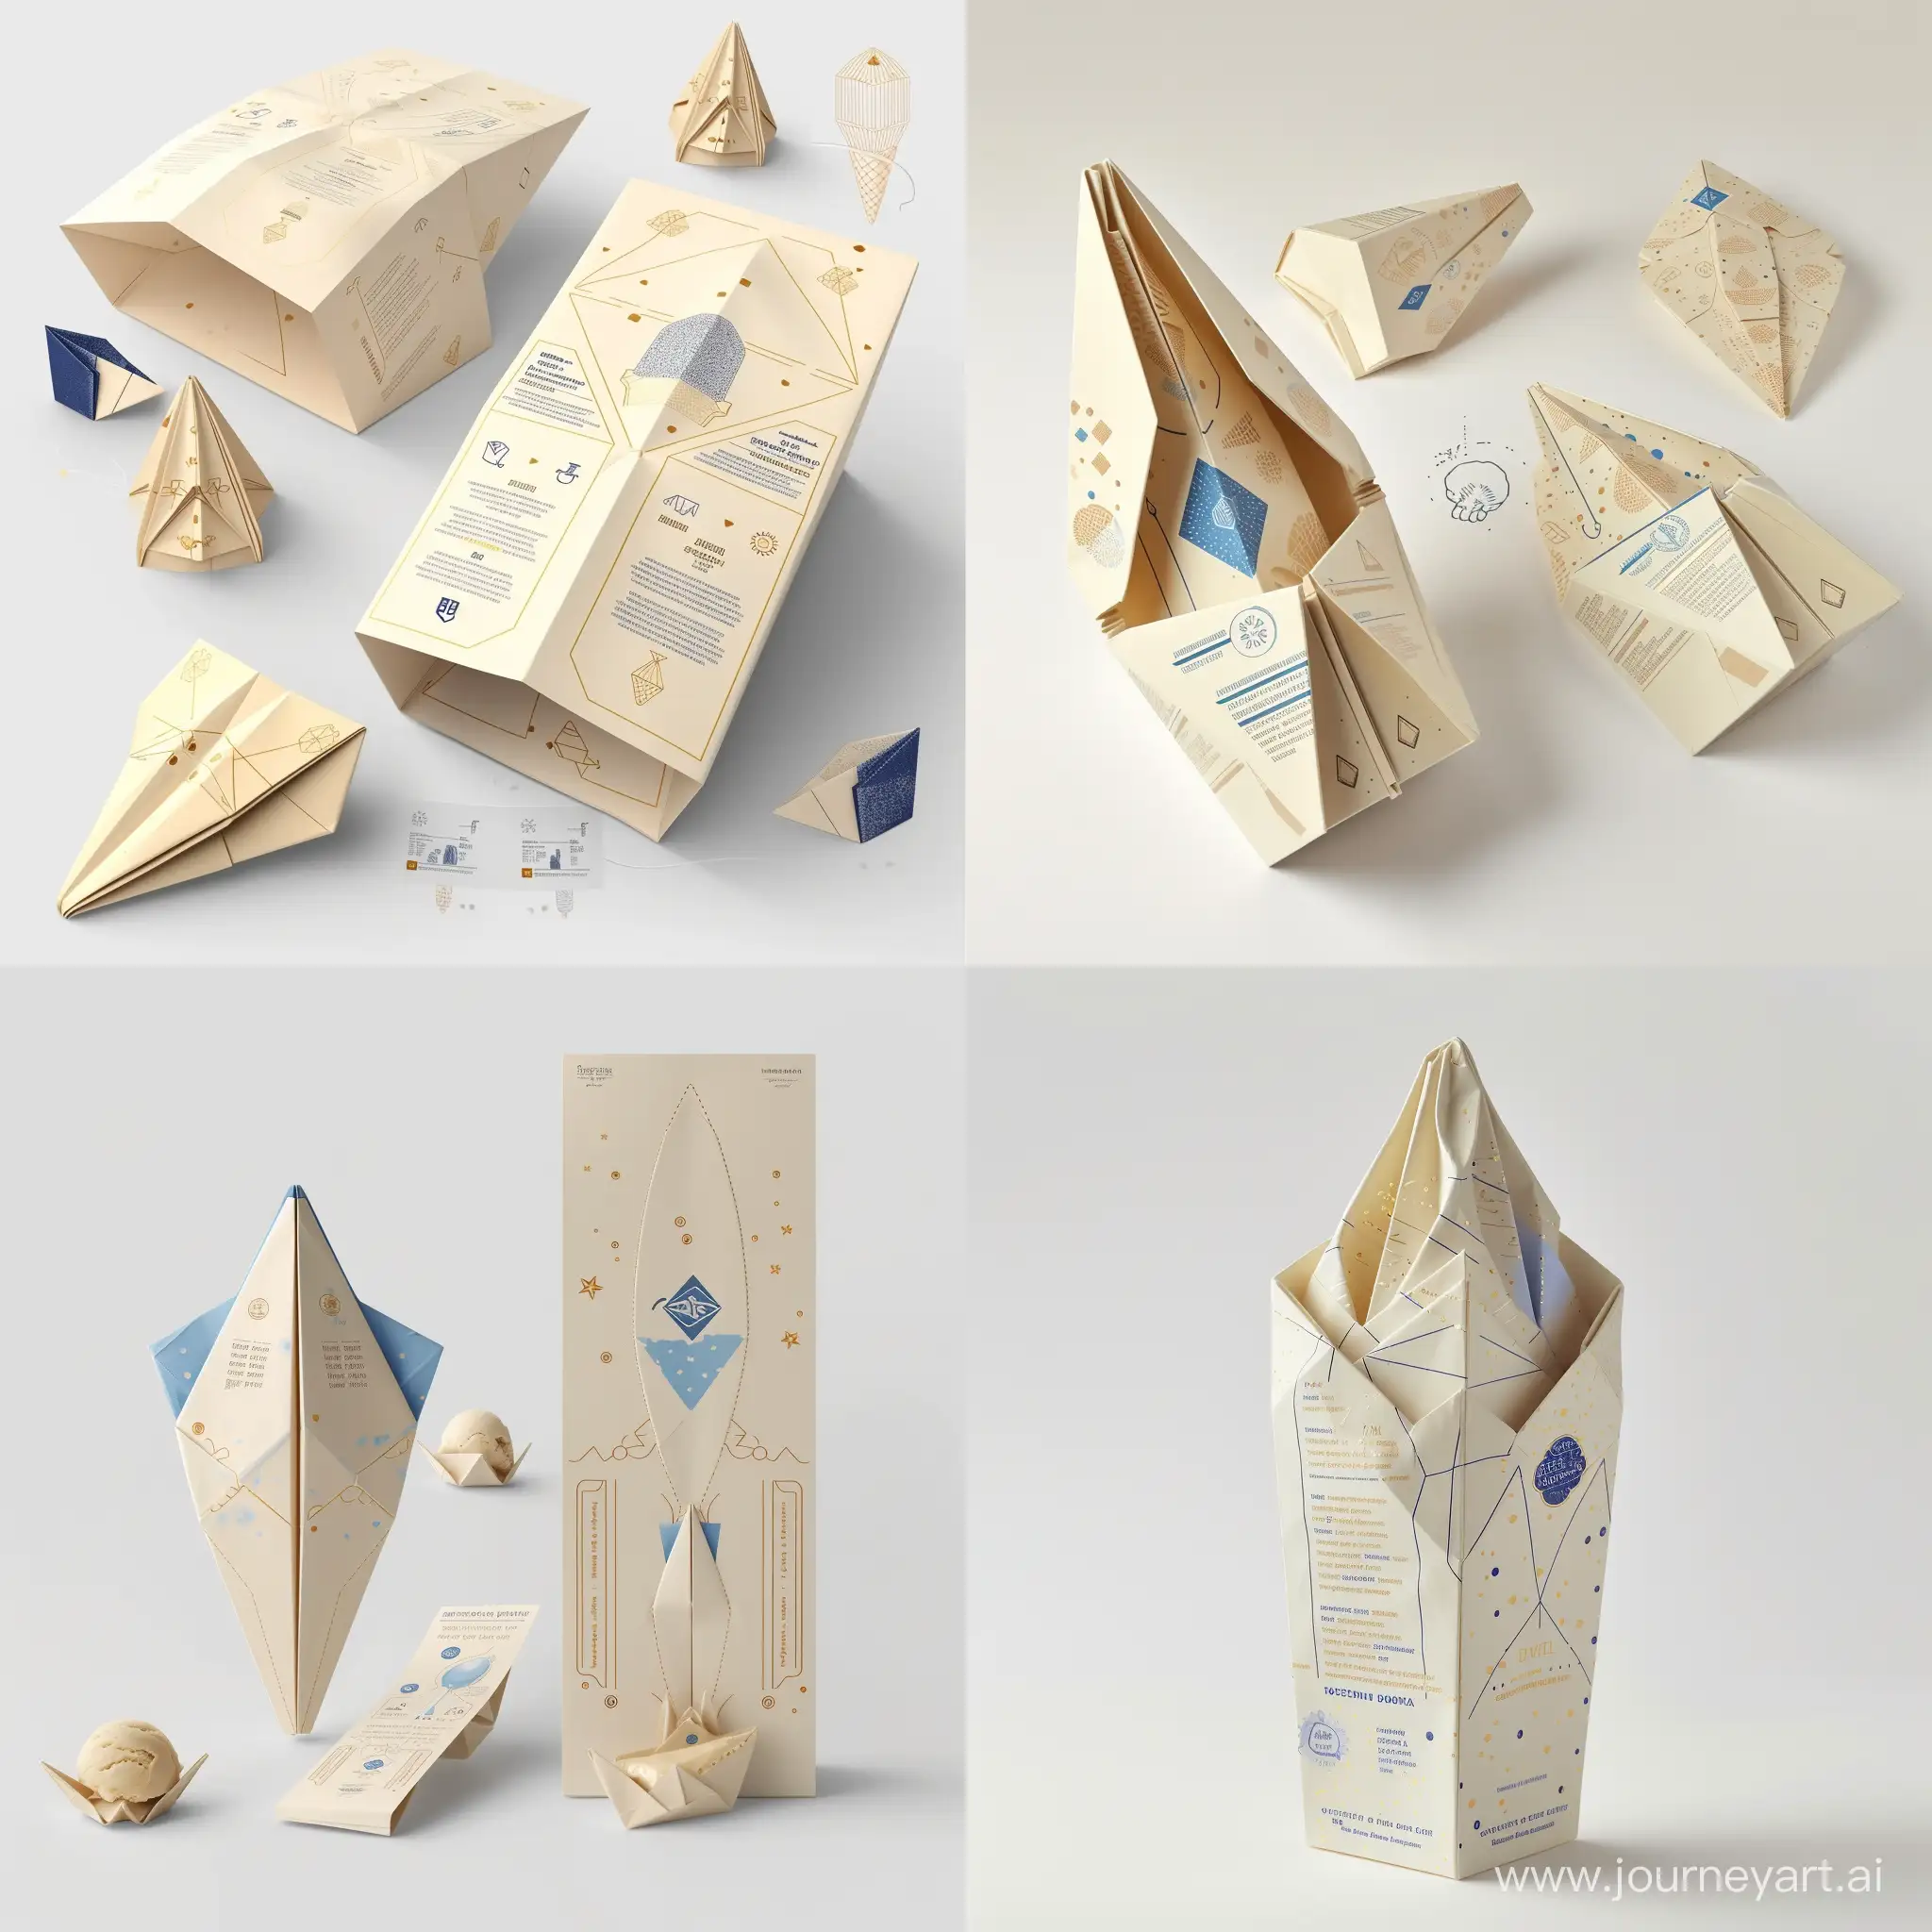 imagine an image of :Interactive Origami Packaging : "Design foldable origami-style ice cream packaging with variable dimensions based on the origami shape. The packaging should have printed guidelines for folding, in beige with blue and gold print. Place the logo on one of the origami flaps. Use durable, foldable paper and accompany with an instruction booklet for different origami shapes."realistic packaging design